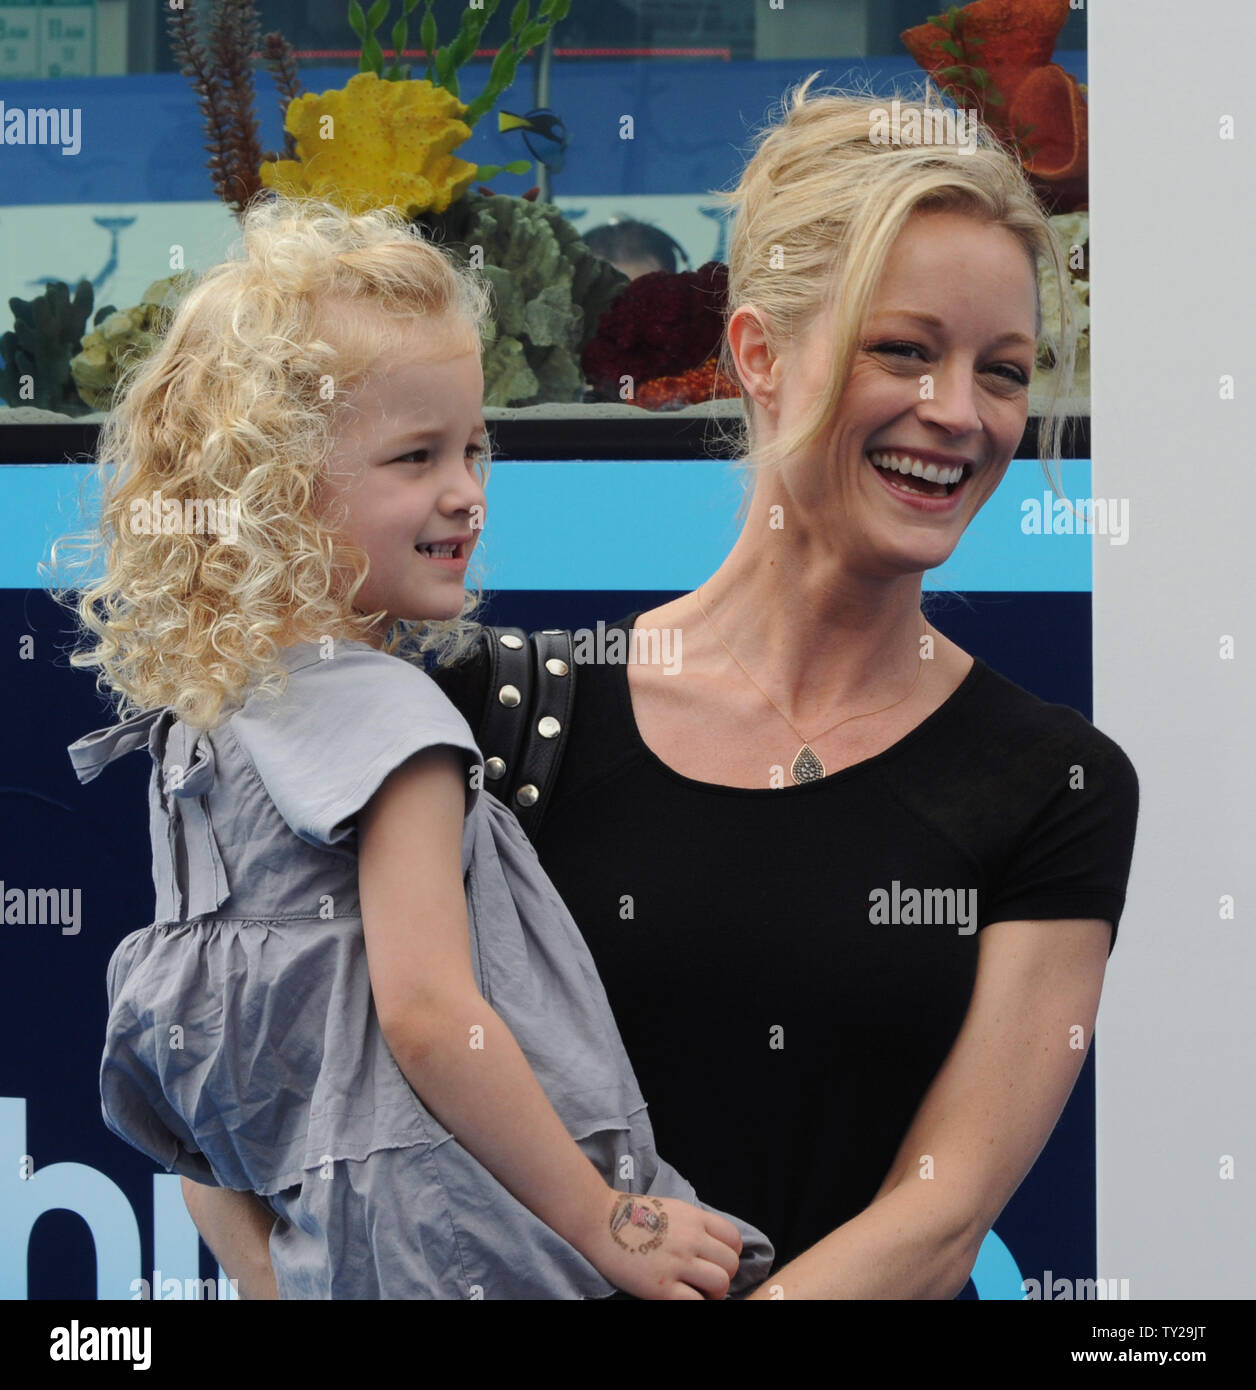 Actress Teri Polo and her daughter Bayley attend the premiere of the motion  picture family drama "Dolphin Tale", in Los Angeles on September 17, 2011.  UPI/Jim Ruymen Stock Photo - Alamy